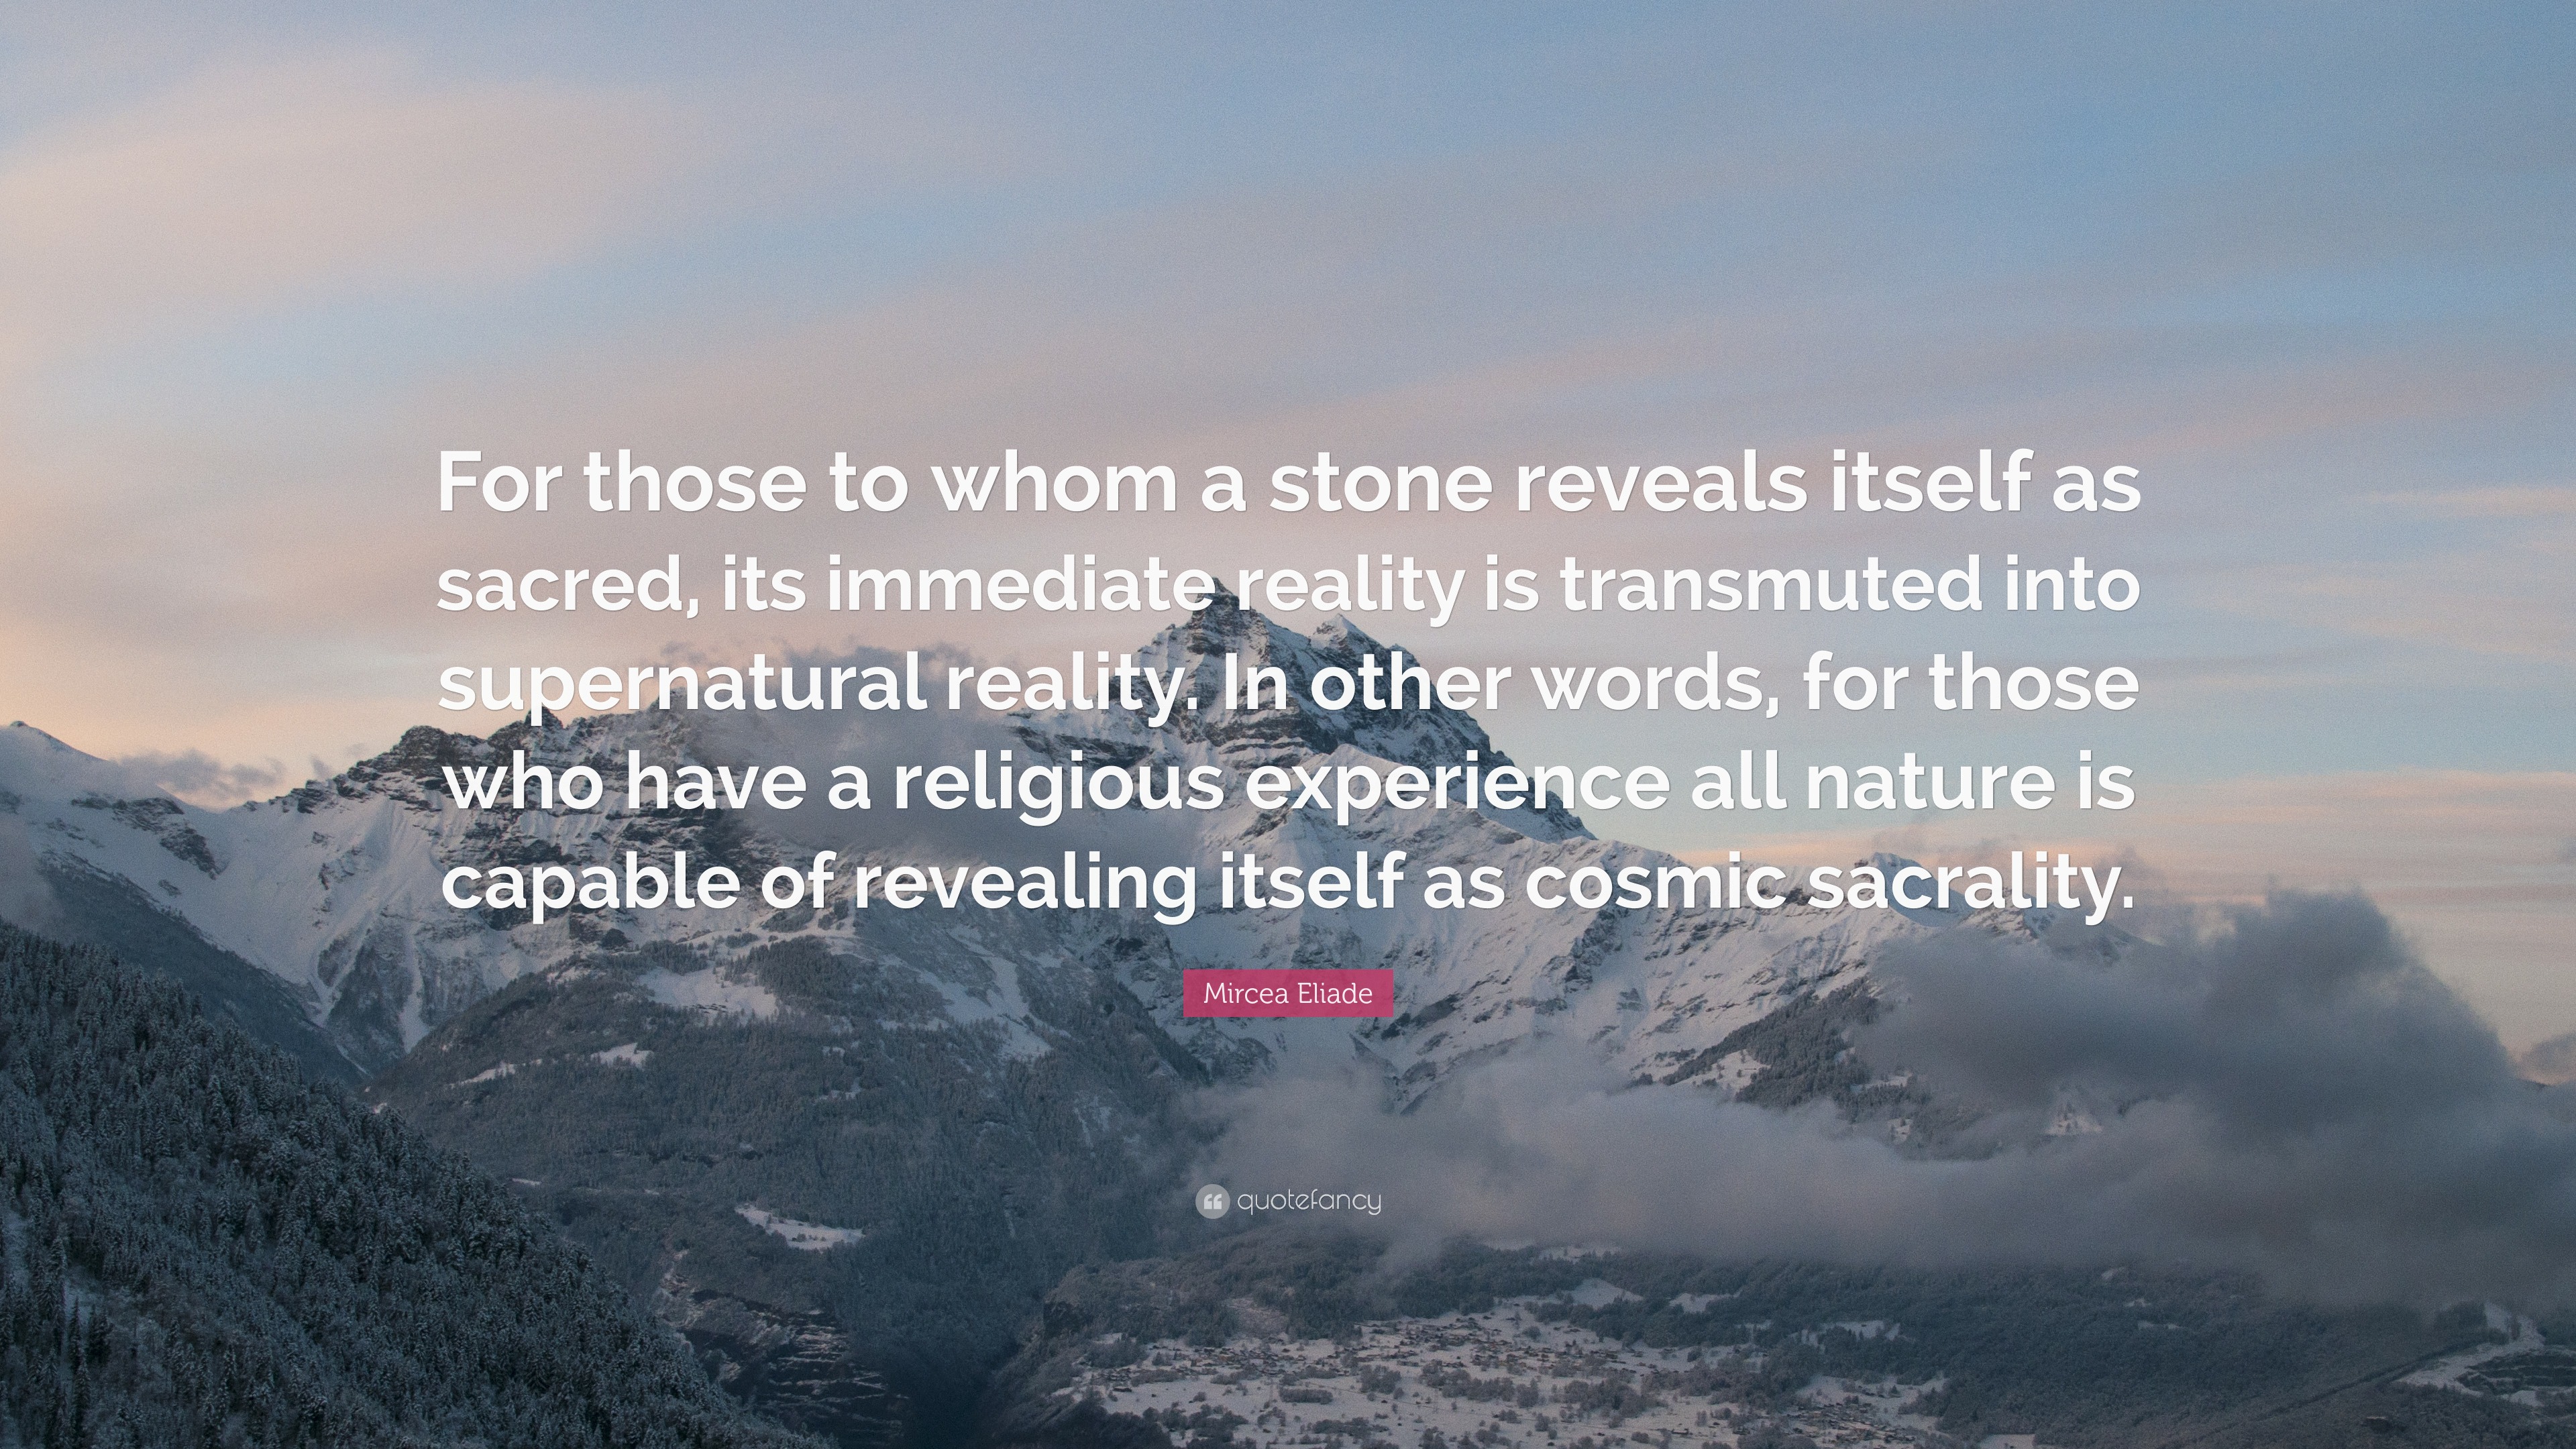 Mircea Eliade Quote: “For those to whom a stone reveals itself as sacred,  its immediate reality is transmuted into supernatural reality. In ot”